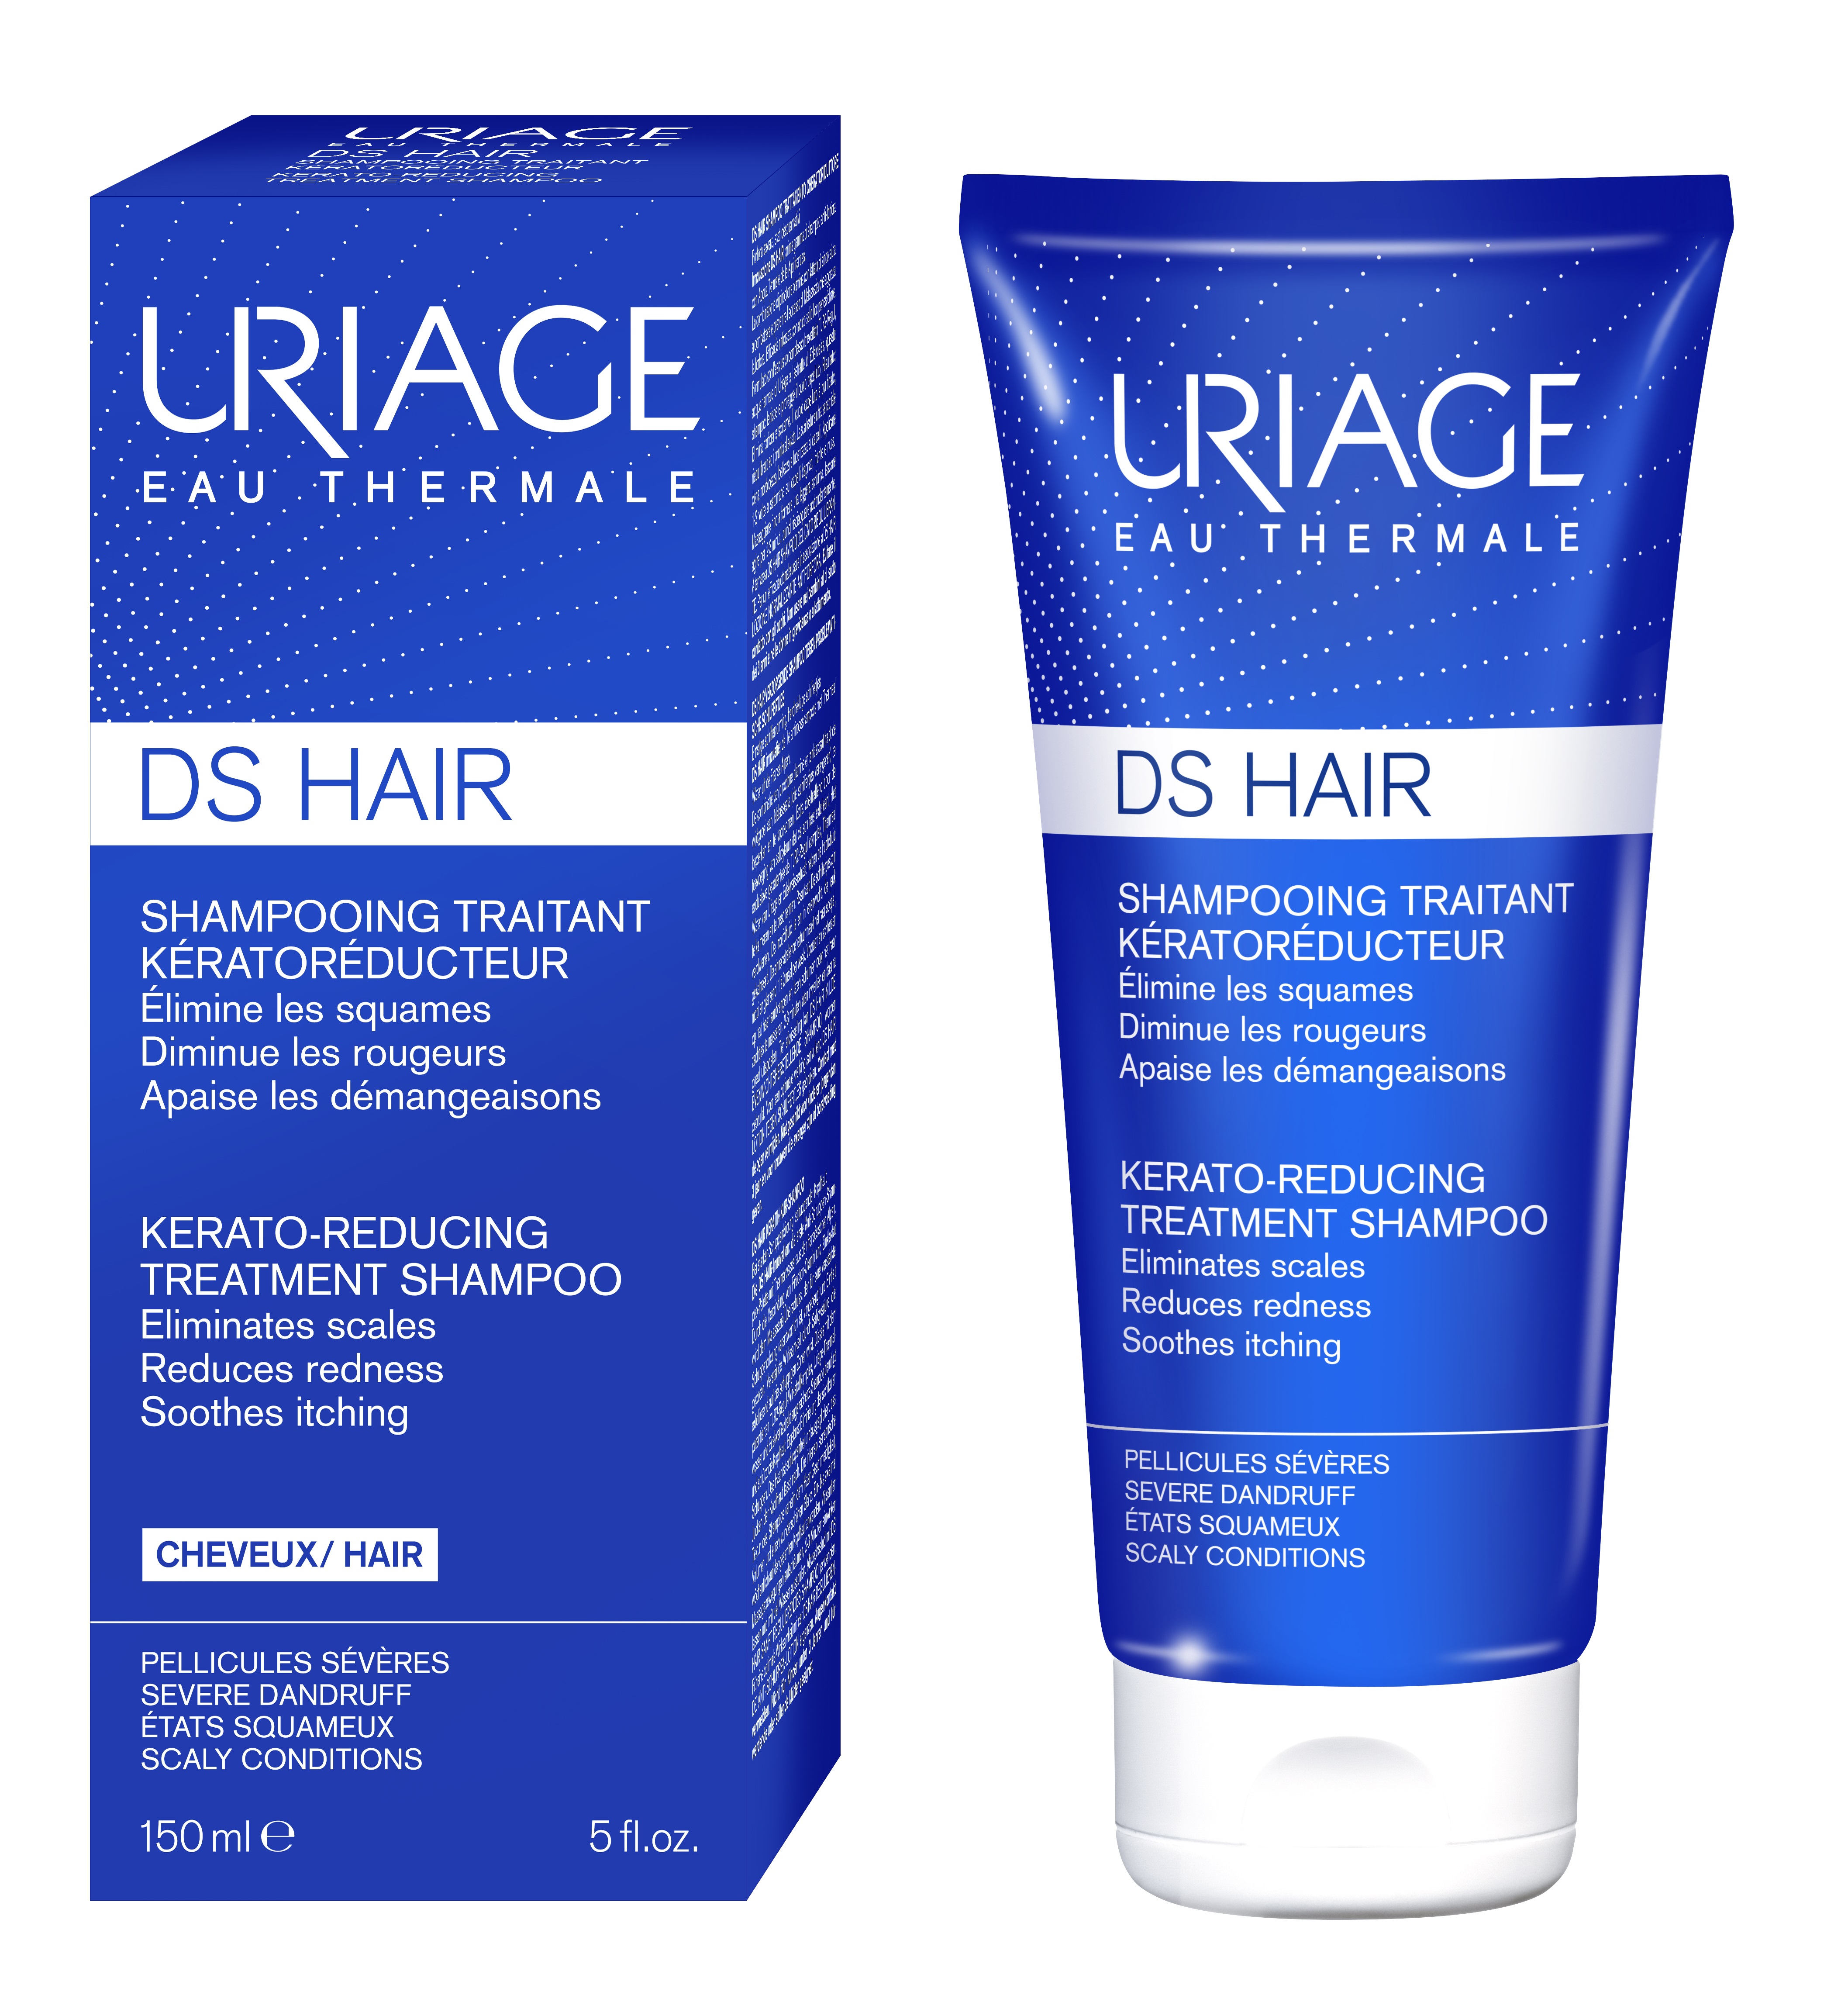 Sampon tratament Kerato-Reductor D.S. HAIR, 150 ml, Uriage